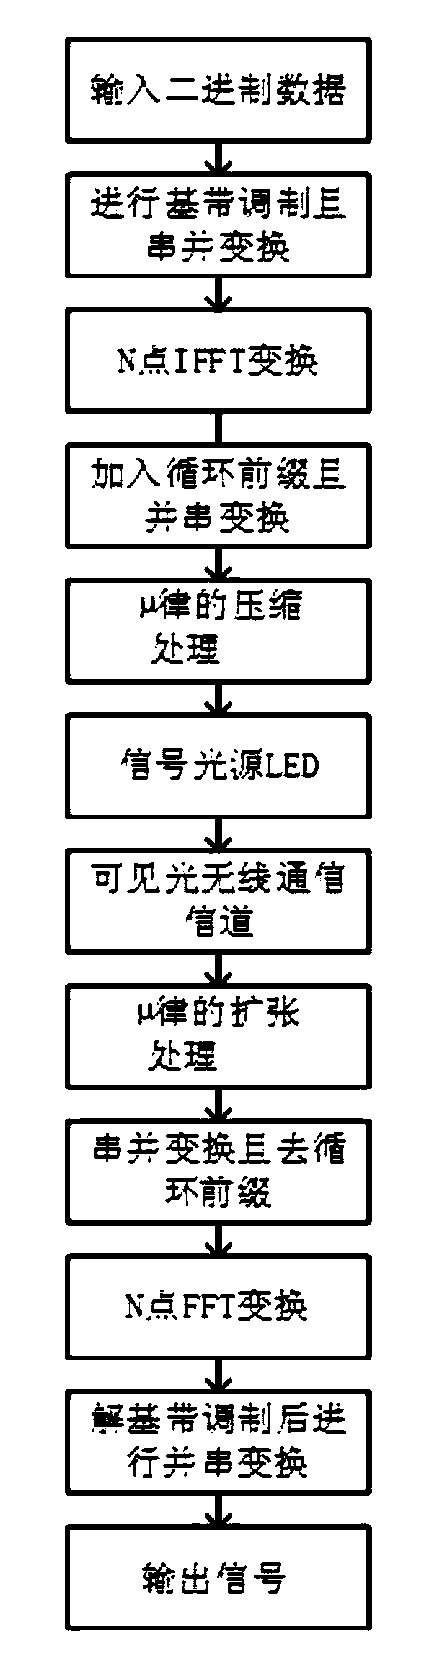 A μ-law method and system for reducing nonlinearity of light source LED in visible light communication system